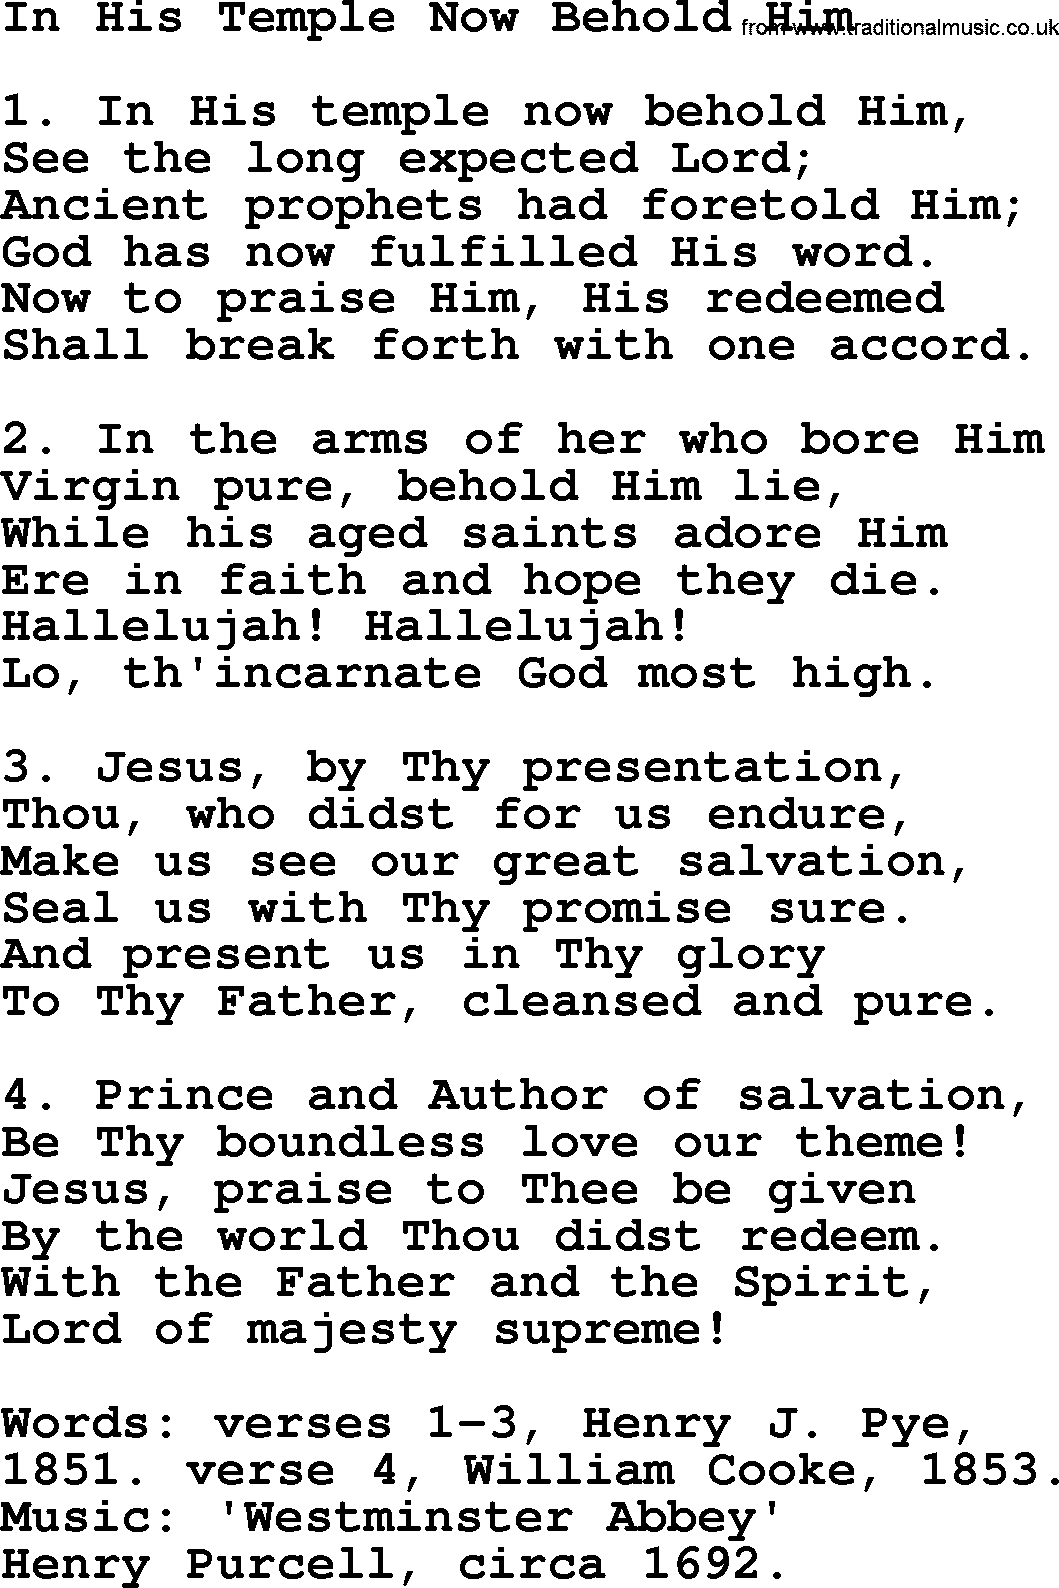 280 Christmas Hymns and songs with PowerPoints and PDF, title: In His Temple Now Behold Him, lyrics, PPT and PDF